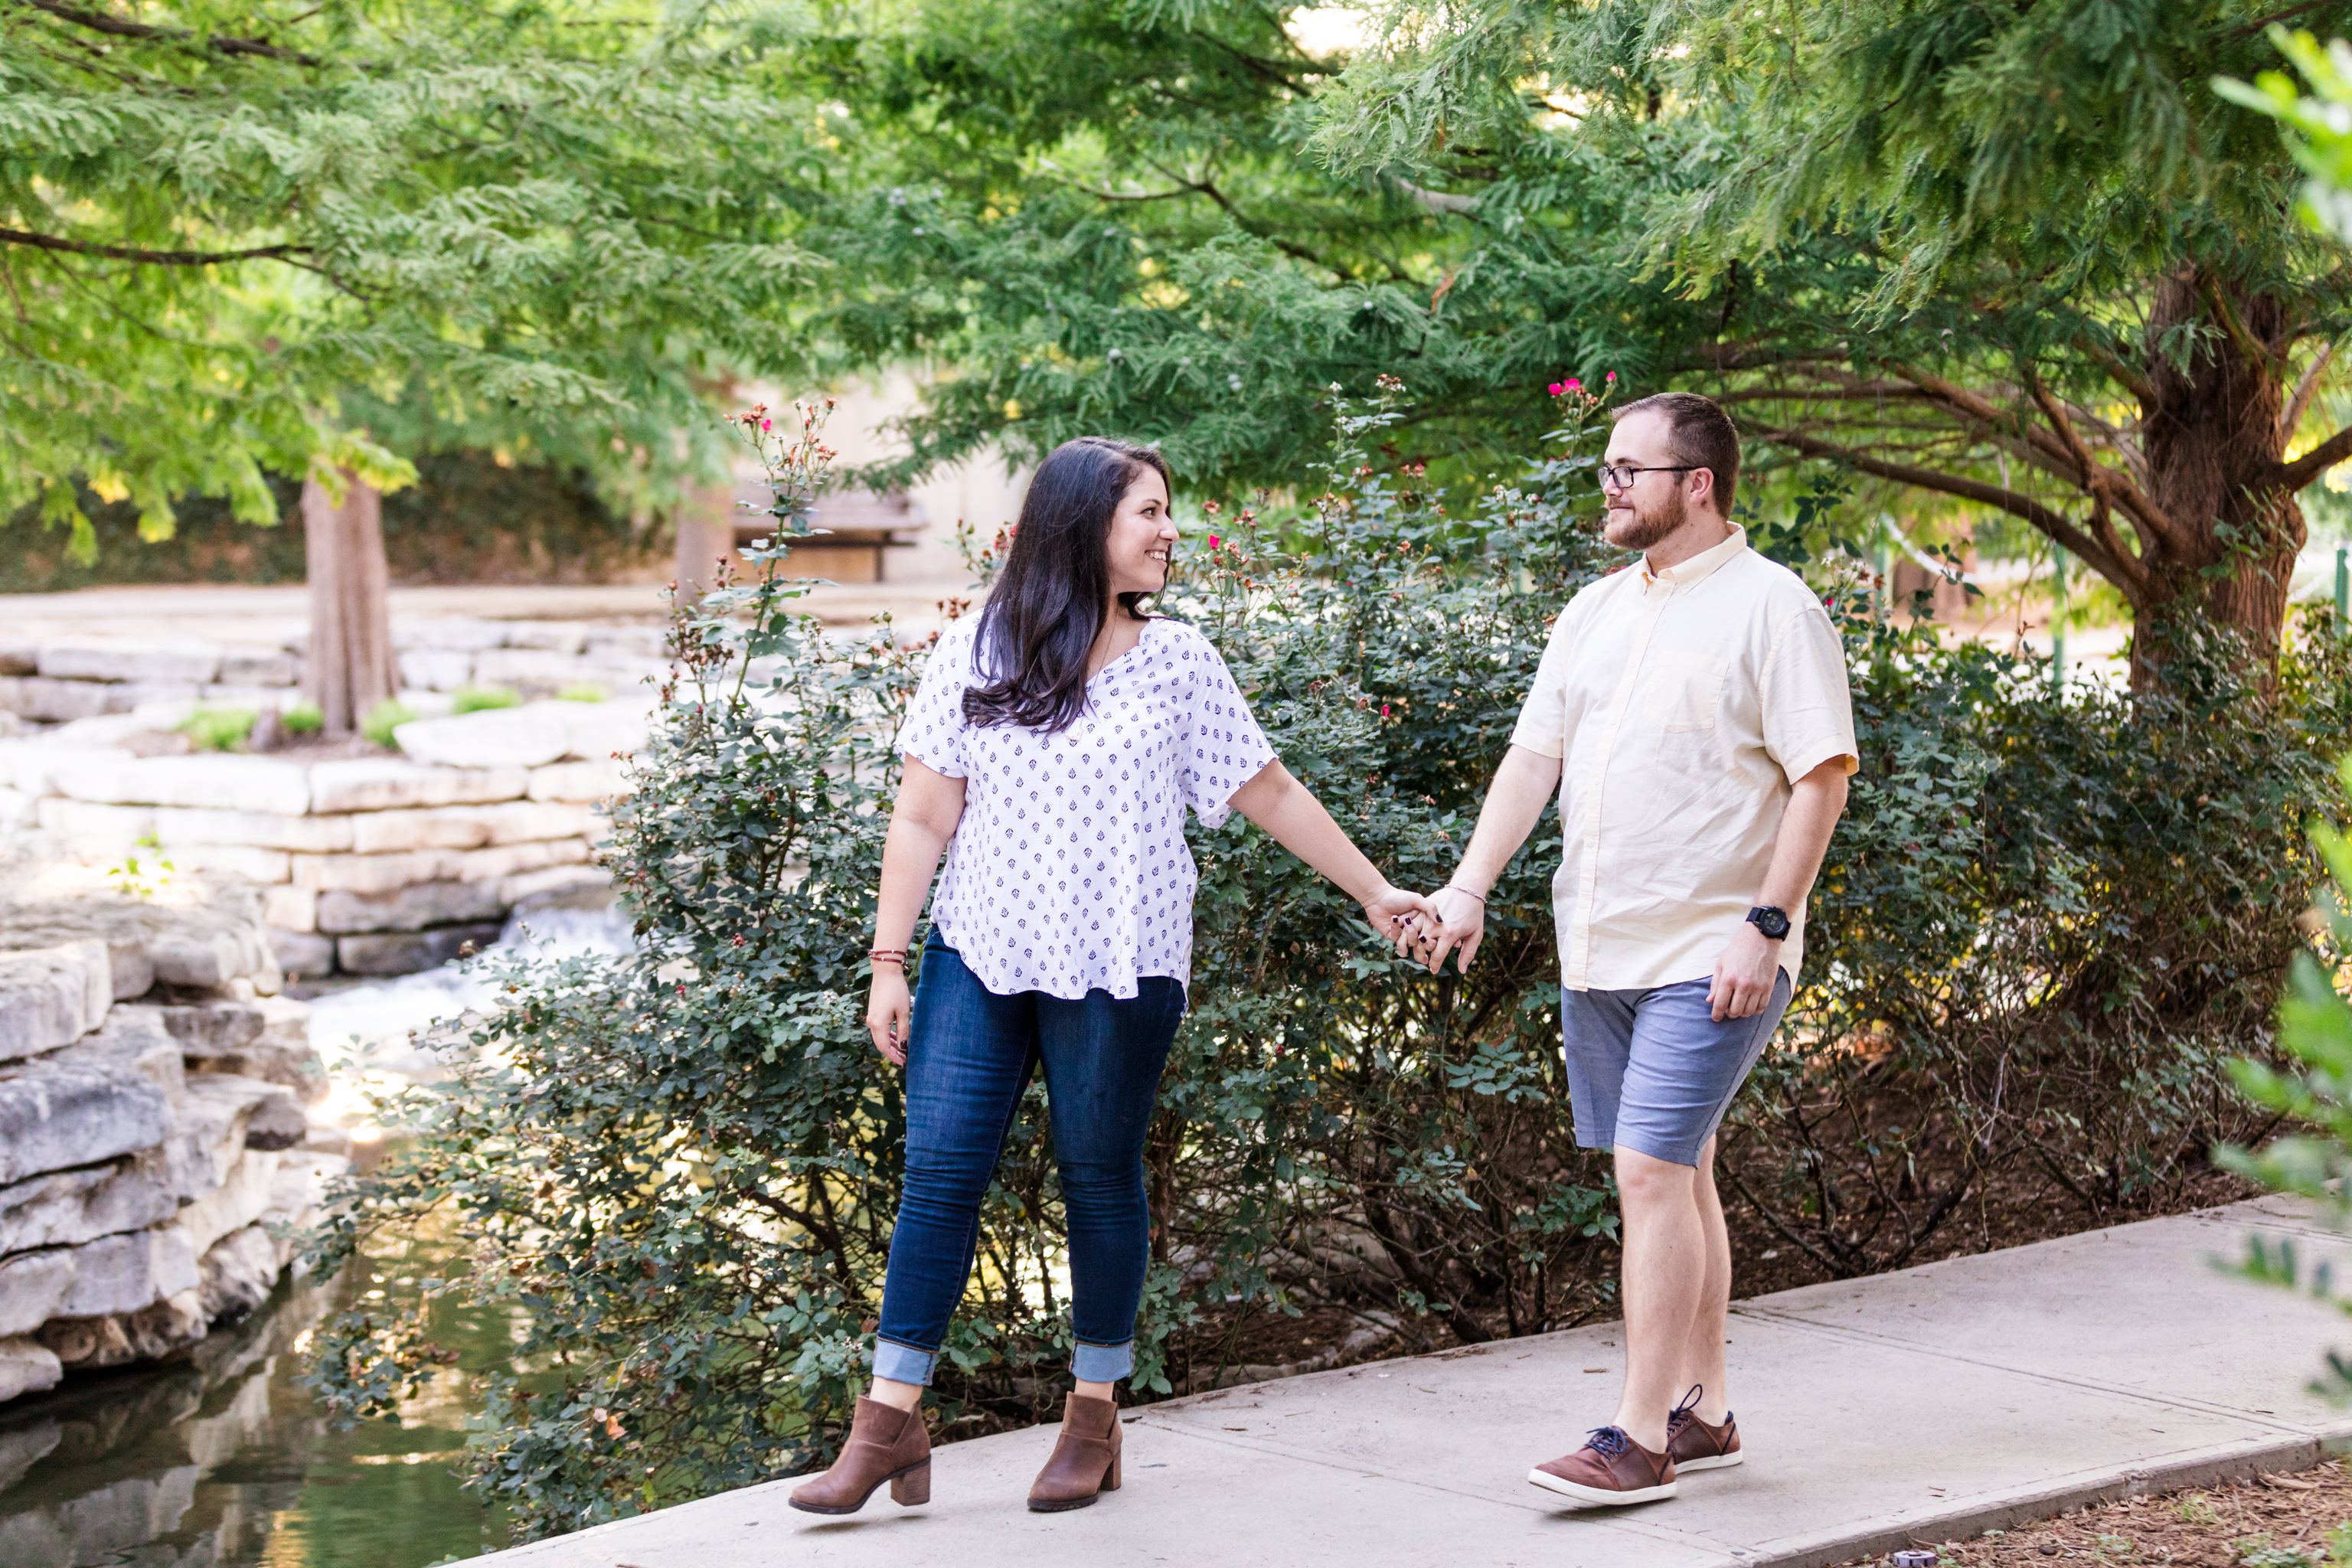 A Summer Engagement Session at The Pearl in Downtown San Antonio by Dawn Elizabeth Studios, San Antonio Wedding Photographer